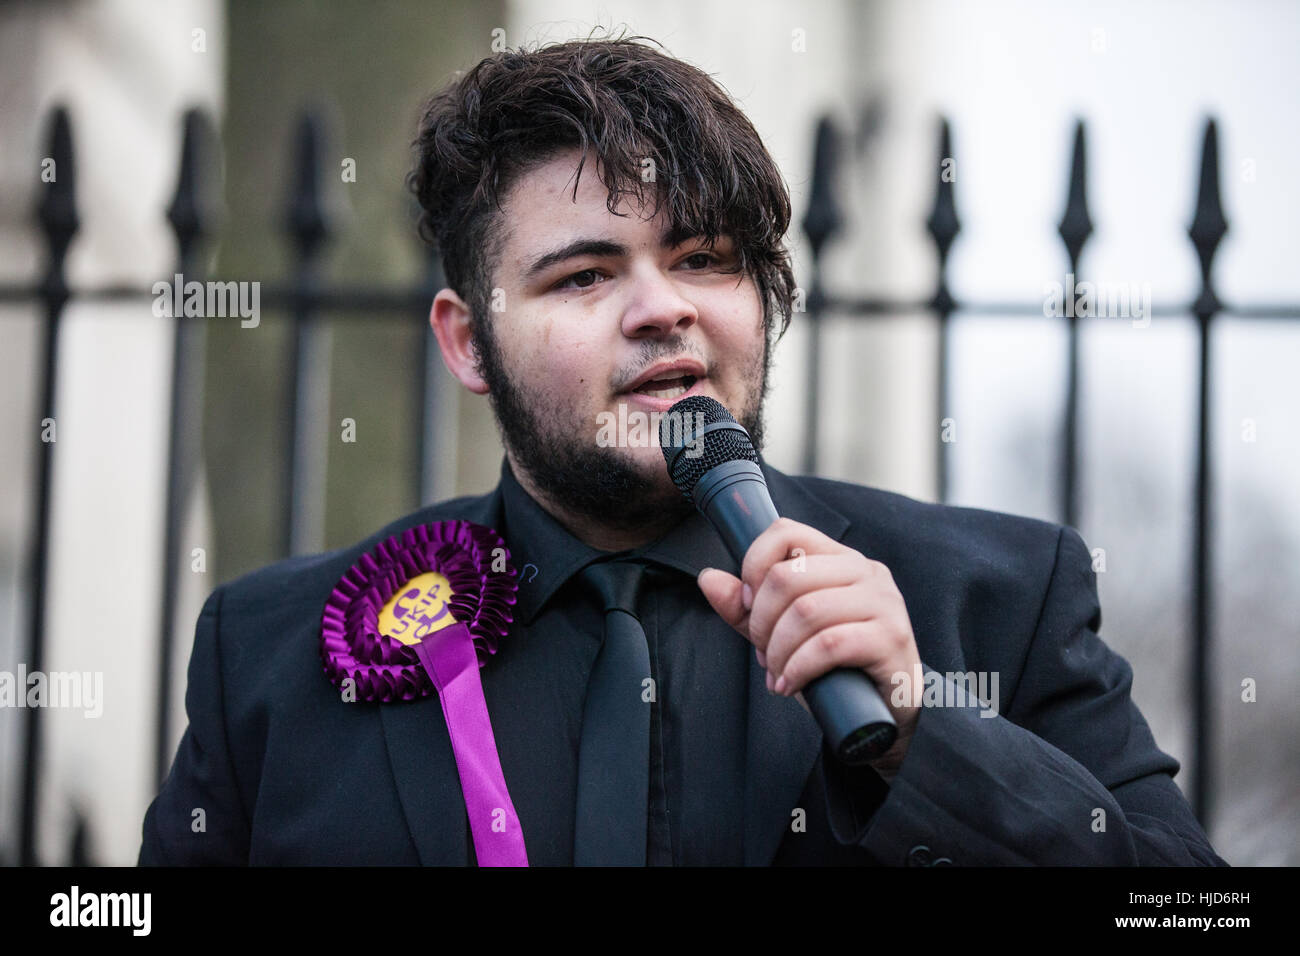 London, UK. 23rd January, 2017. Reko Smith, Vice Chairperson for Manchester Young Carers' Forum, addresses pro-Brexit campaigners attending a 'Brexit Peaceful Loud and Proud' rally organised by UKIP outside Downing Street. Campaigners intend to ensure that the EU Referendum vote is implemented. Credit: Mark Kerrison/Alamy Live News Stock Photo